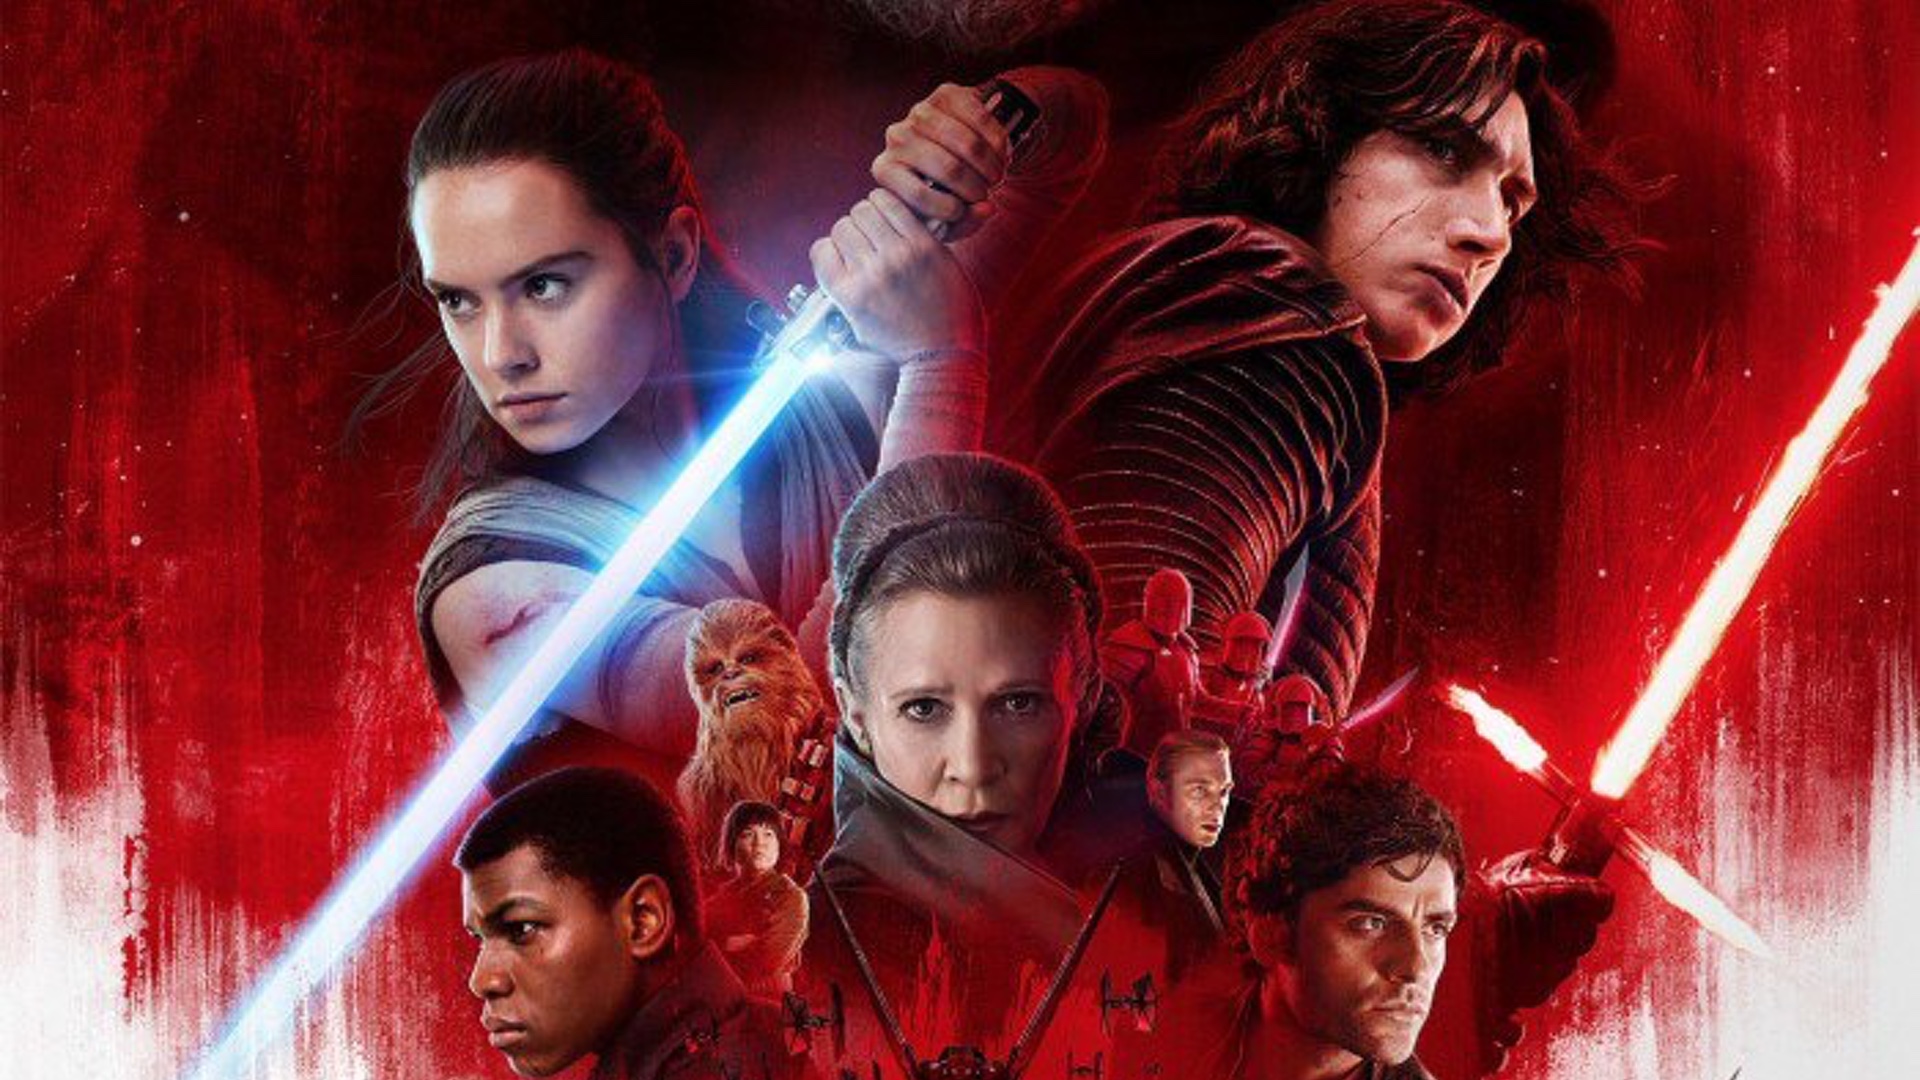 New Standee For STAR WARS: THE LAST JEDI Features Luke Skywalker on The Lig...